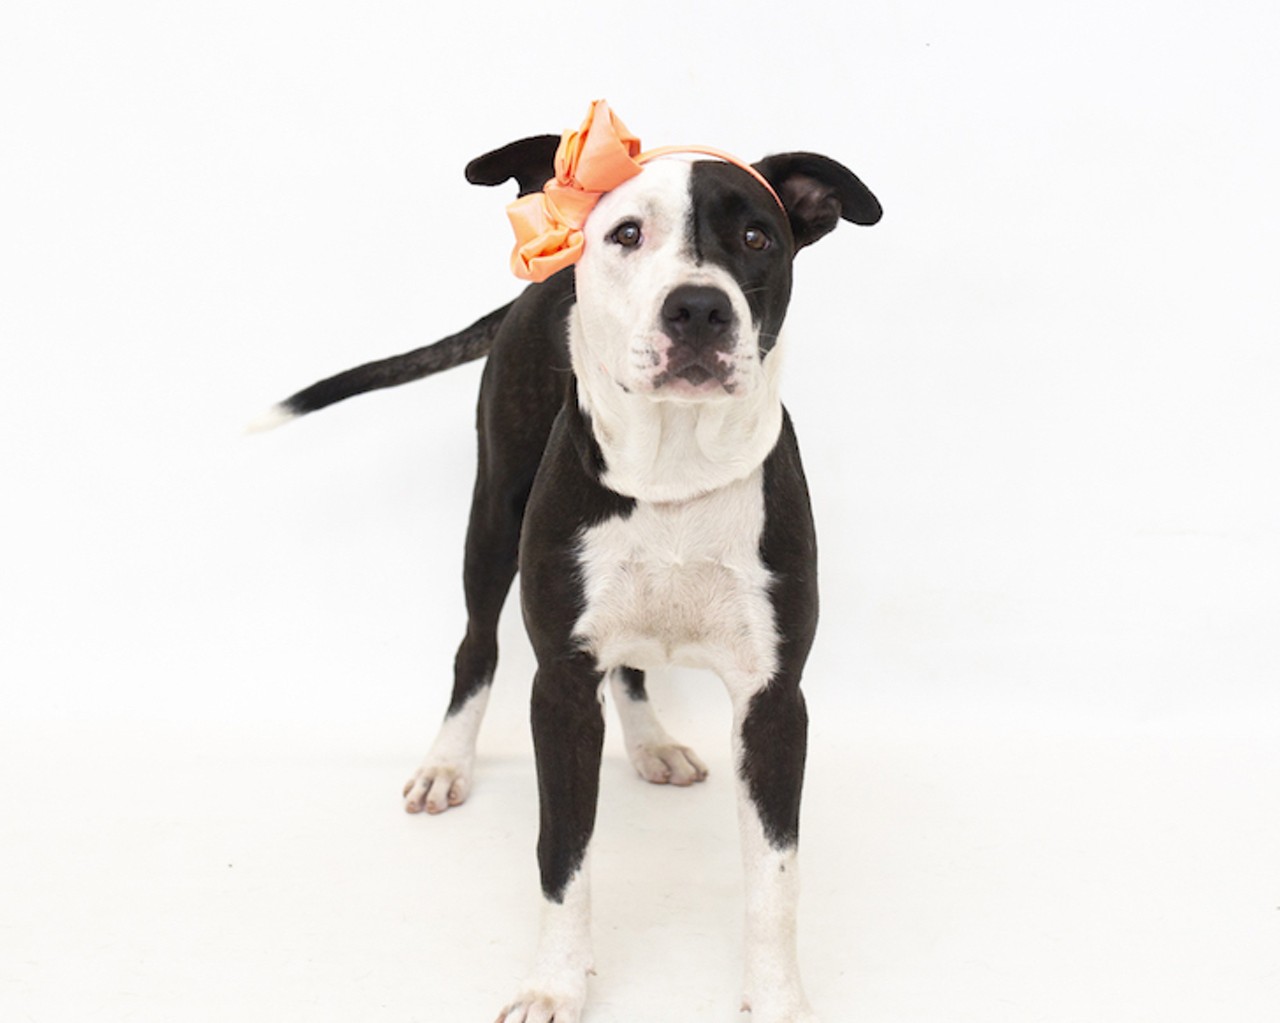 13 adoptable dogs available right now at Orange County Animal Services